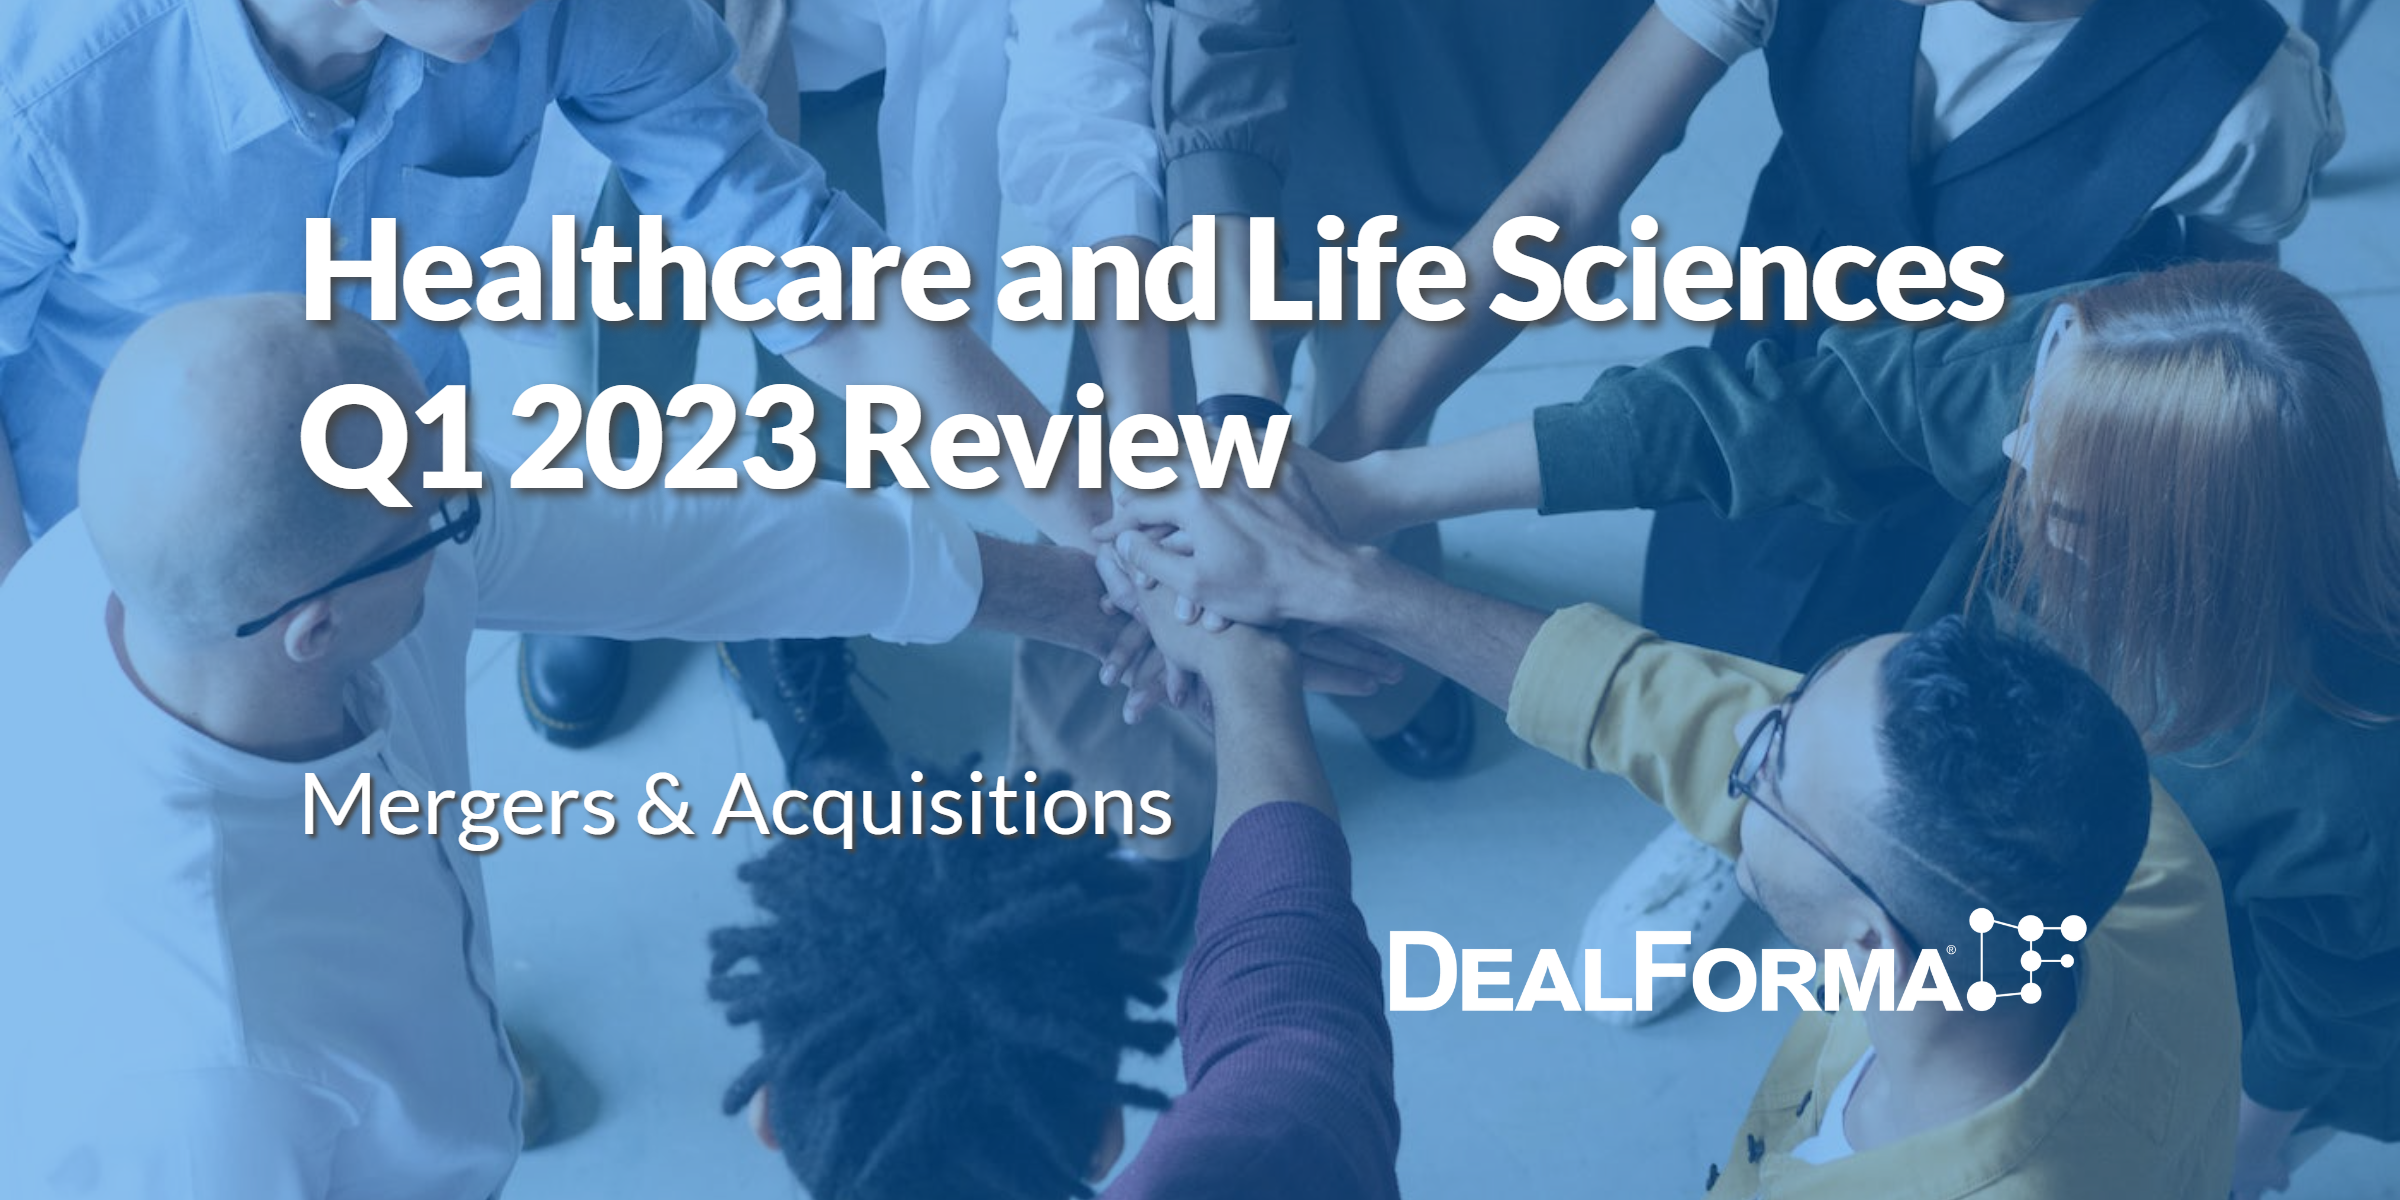 Healthcare and Life Sciences Q1 2023 Review